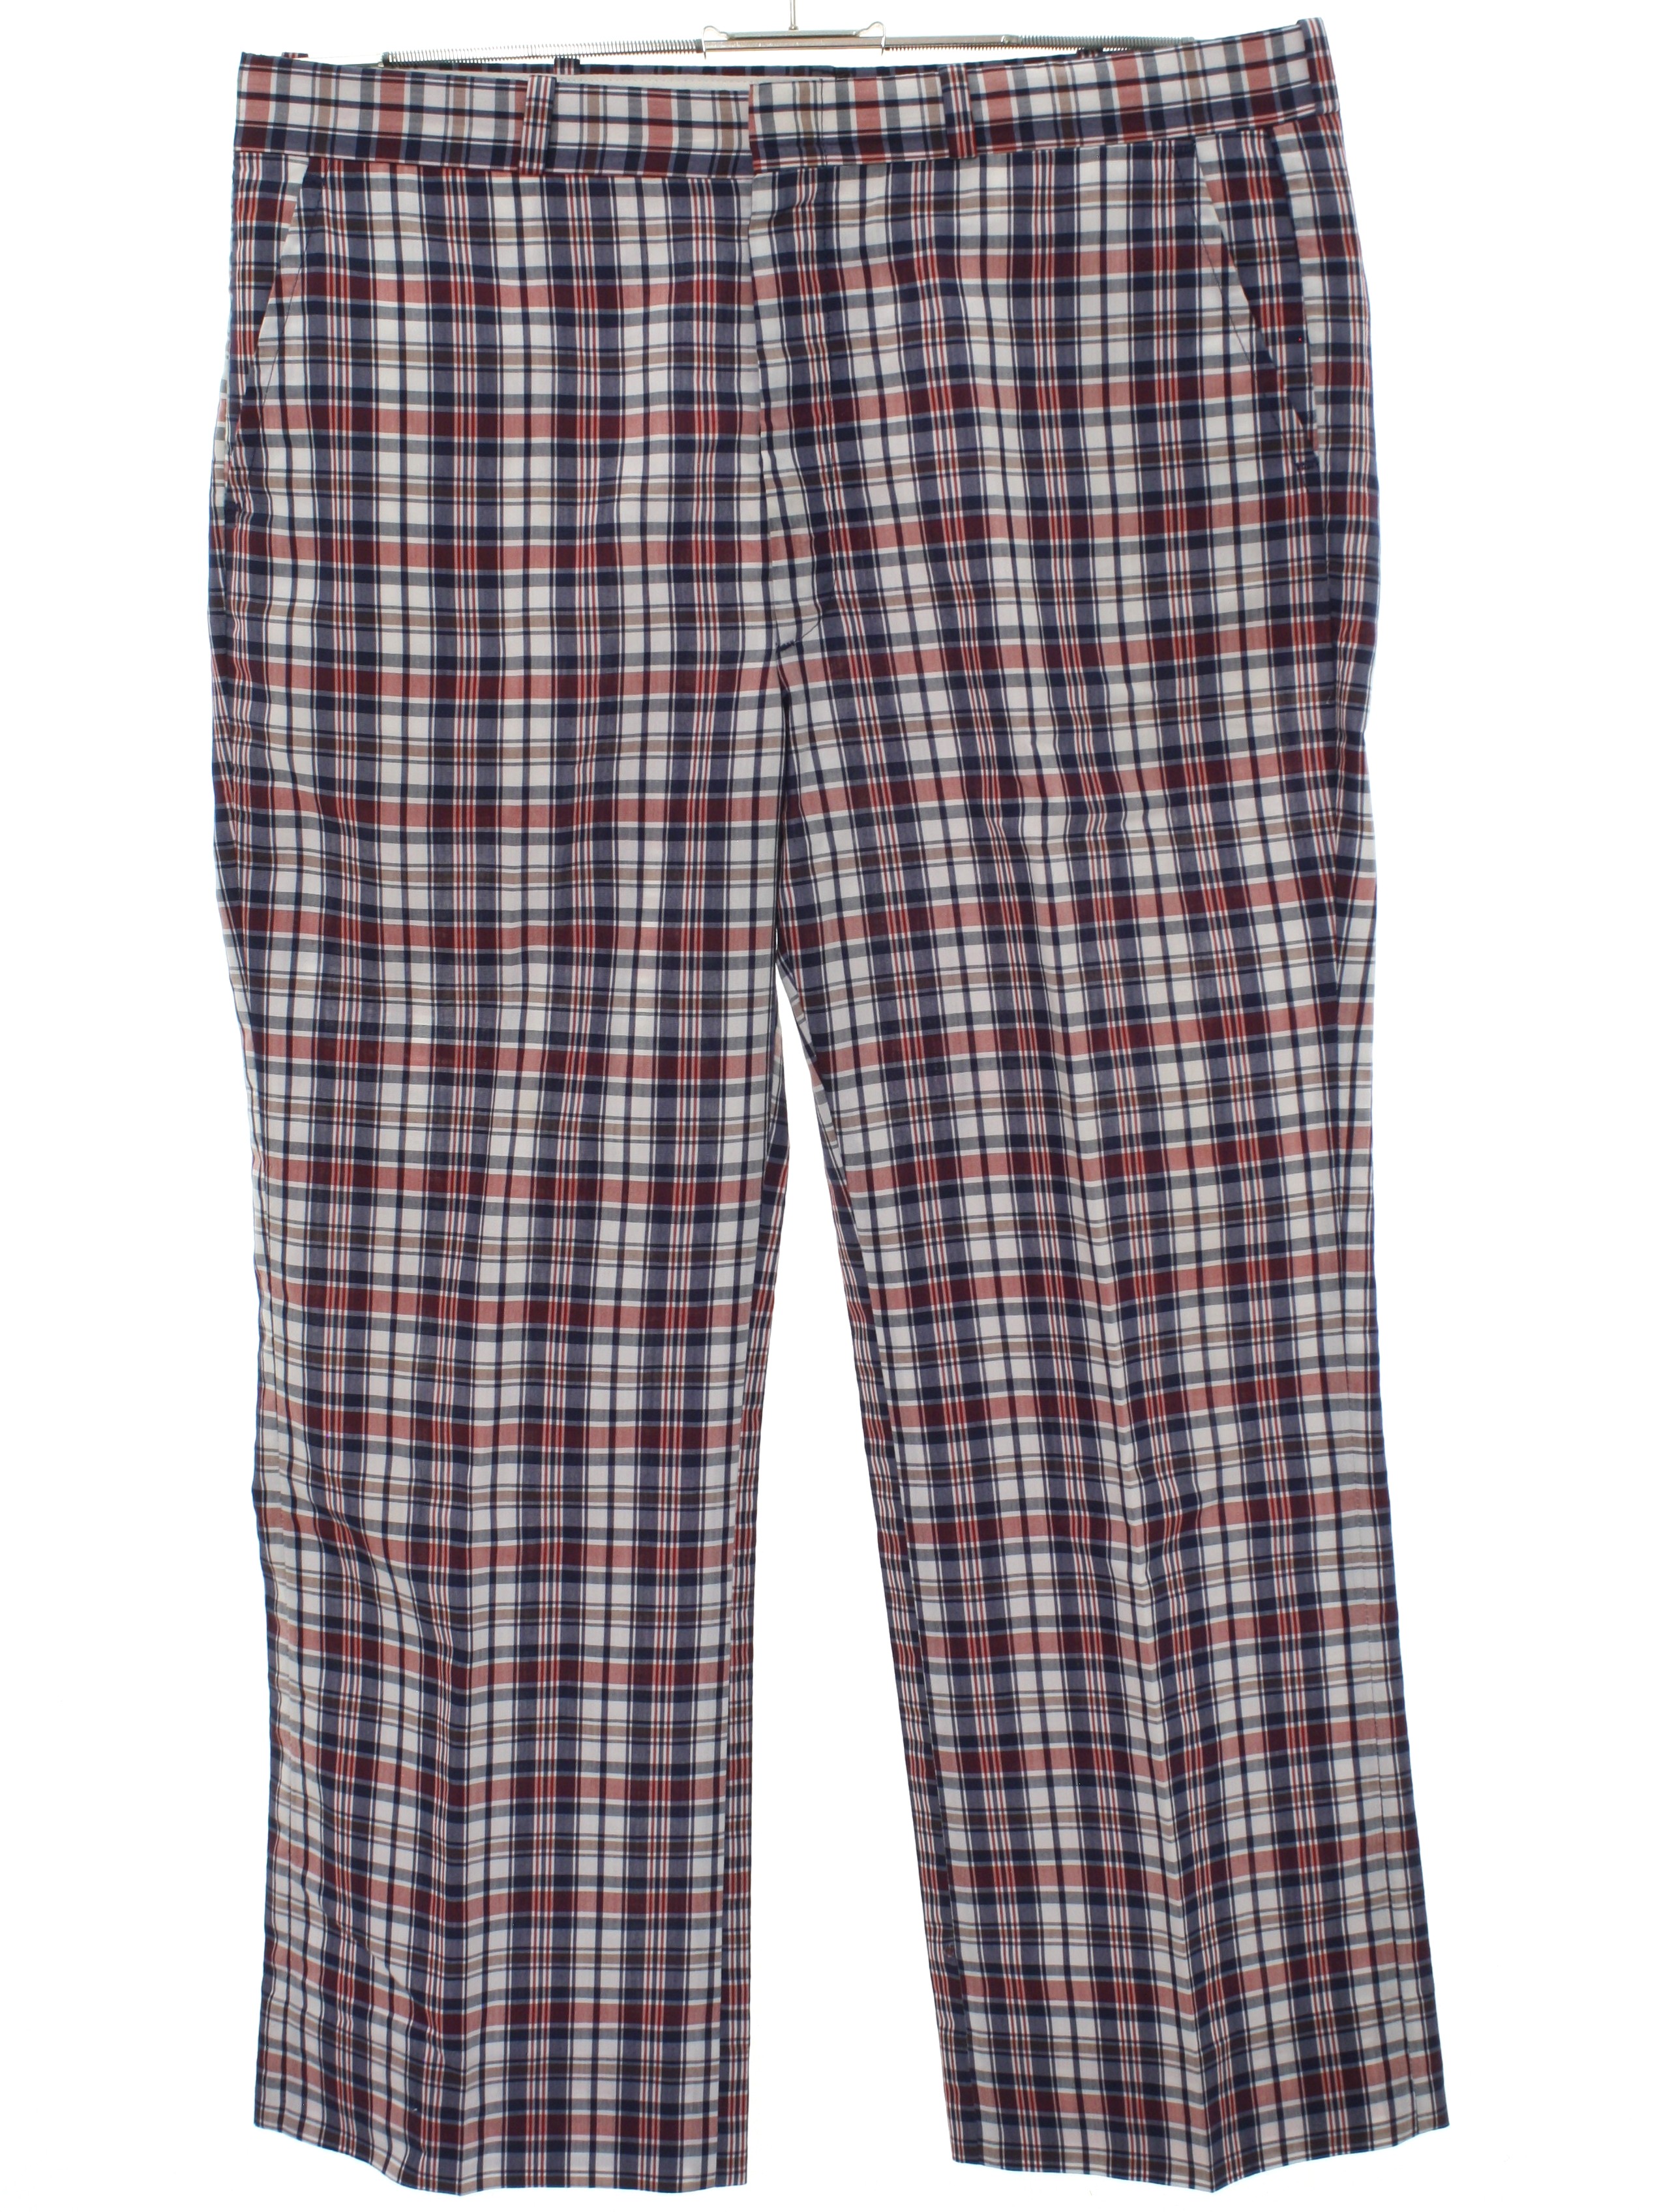 Retro 80's Pants: 80s -Farah- Mens white, midnight blue, red and brown ...